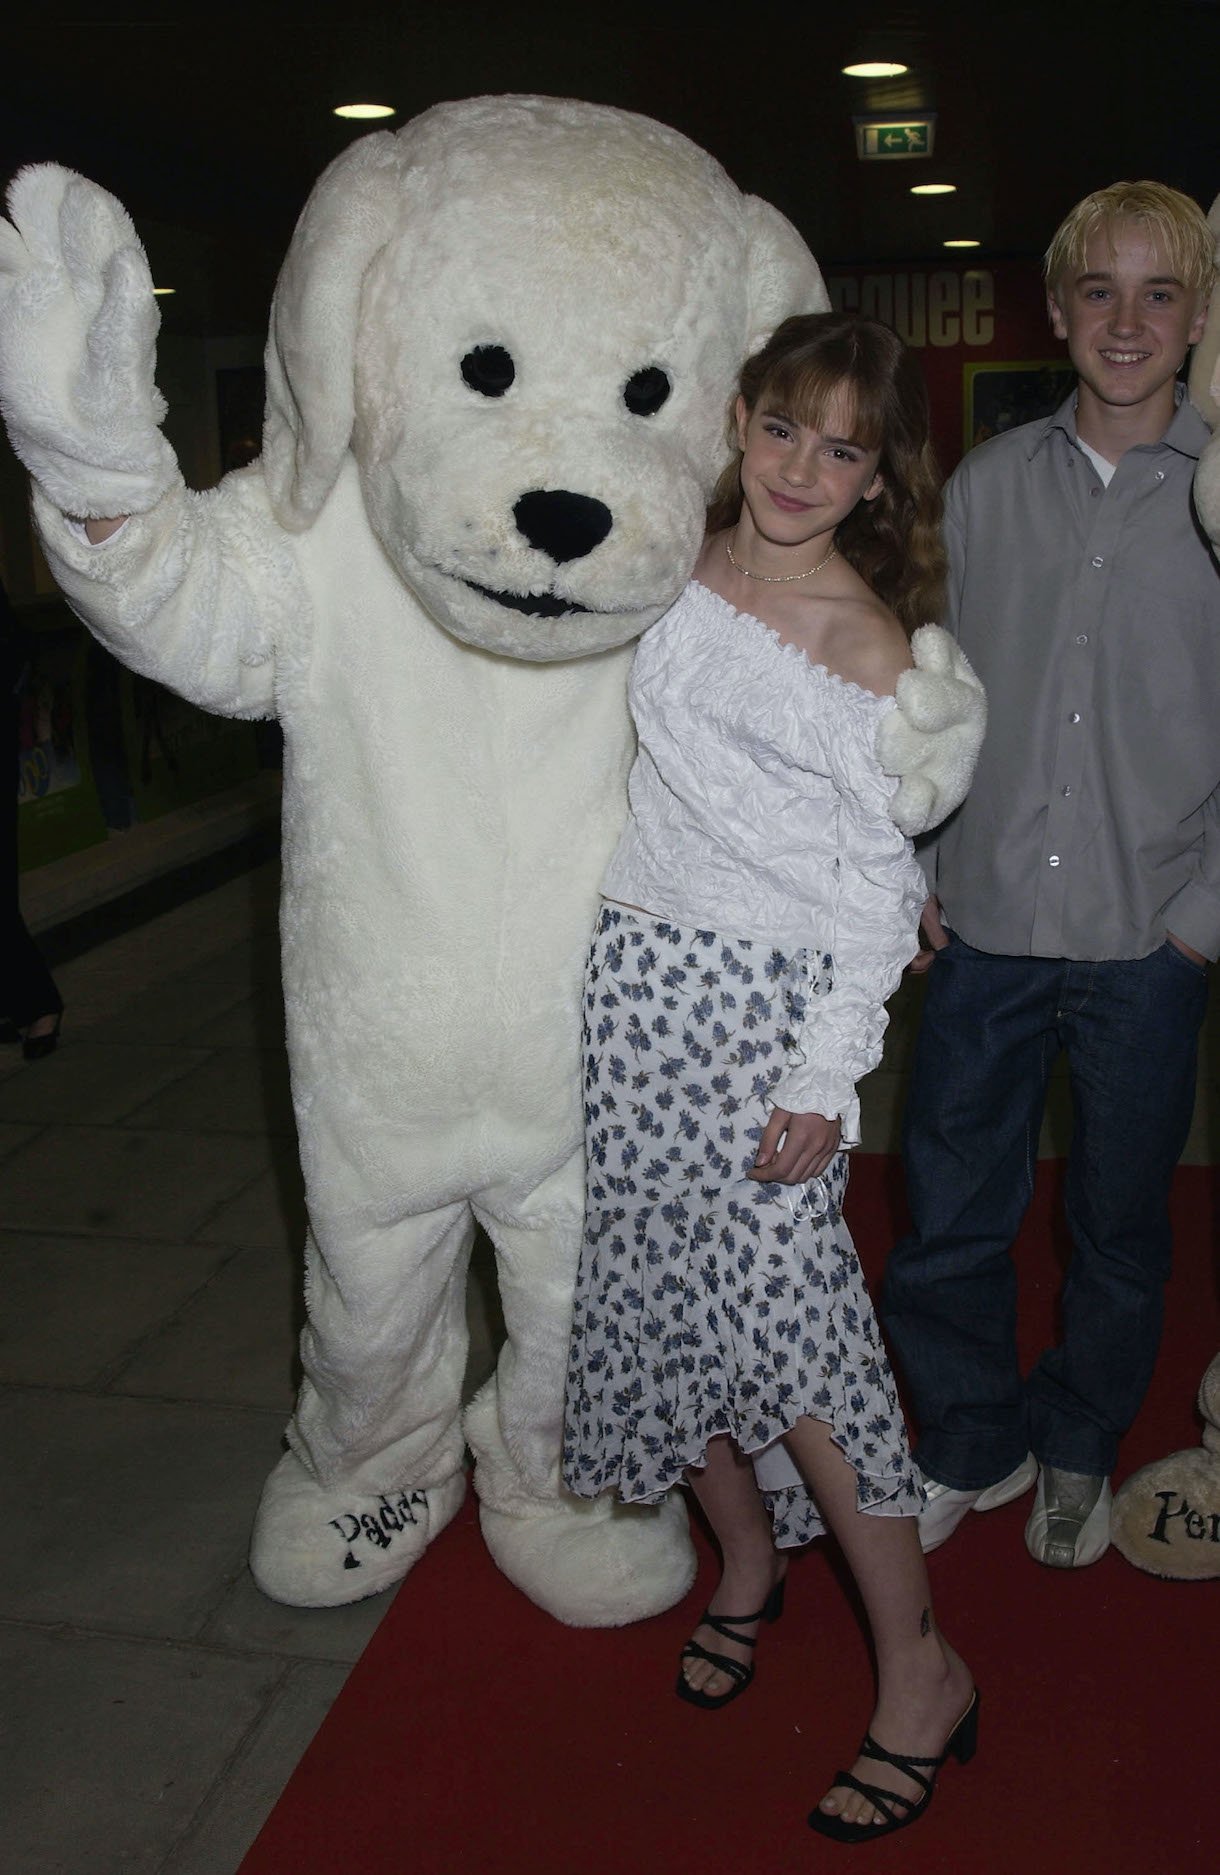 Emma Watson and Tom Felton from the Harry Potter film series at the London premiere of Scooby-Doo in 2002